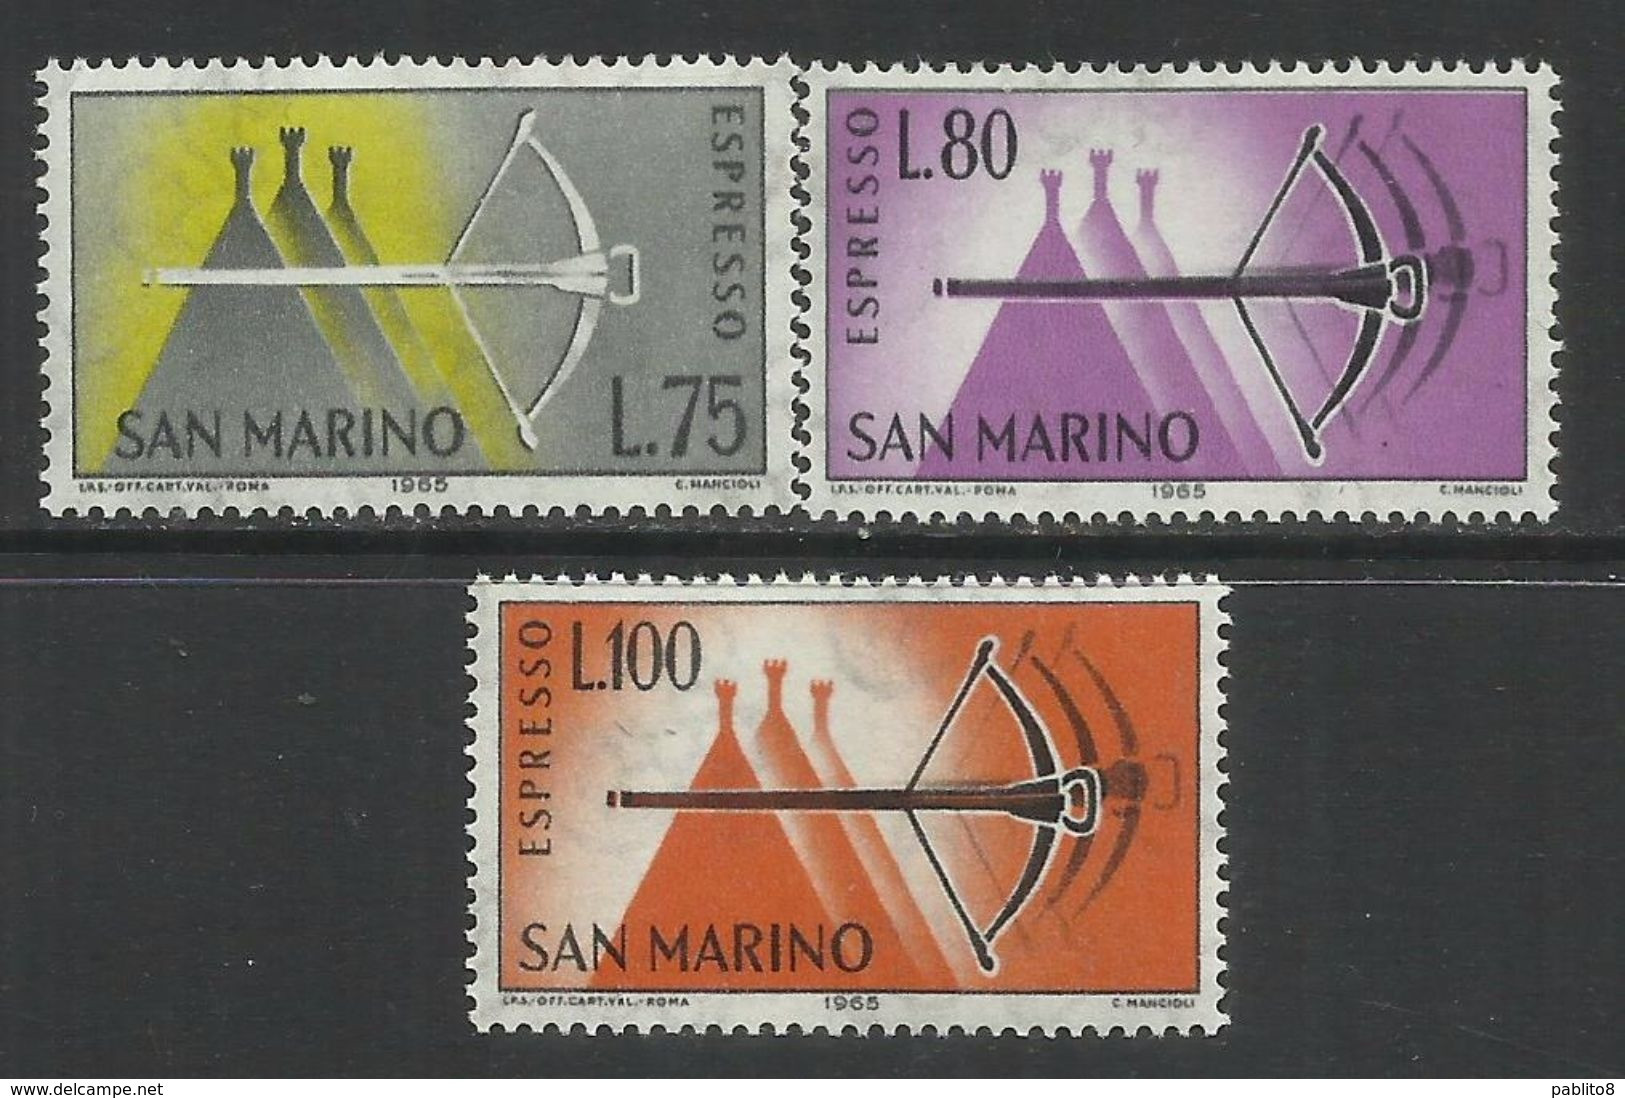 SAN MARINO 1966 ESPRESSI BALESTRA SPECIAL DELIVERY CROSSBOW SERIE COMPLETA COMPLETE SET MNH - Eilpost